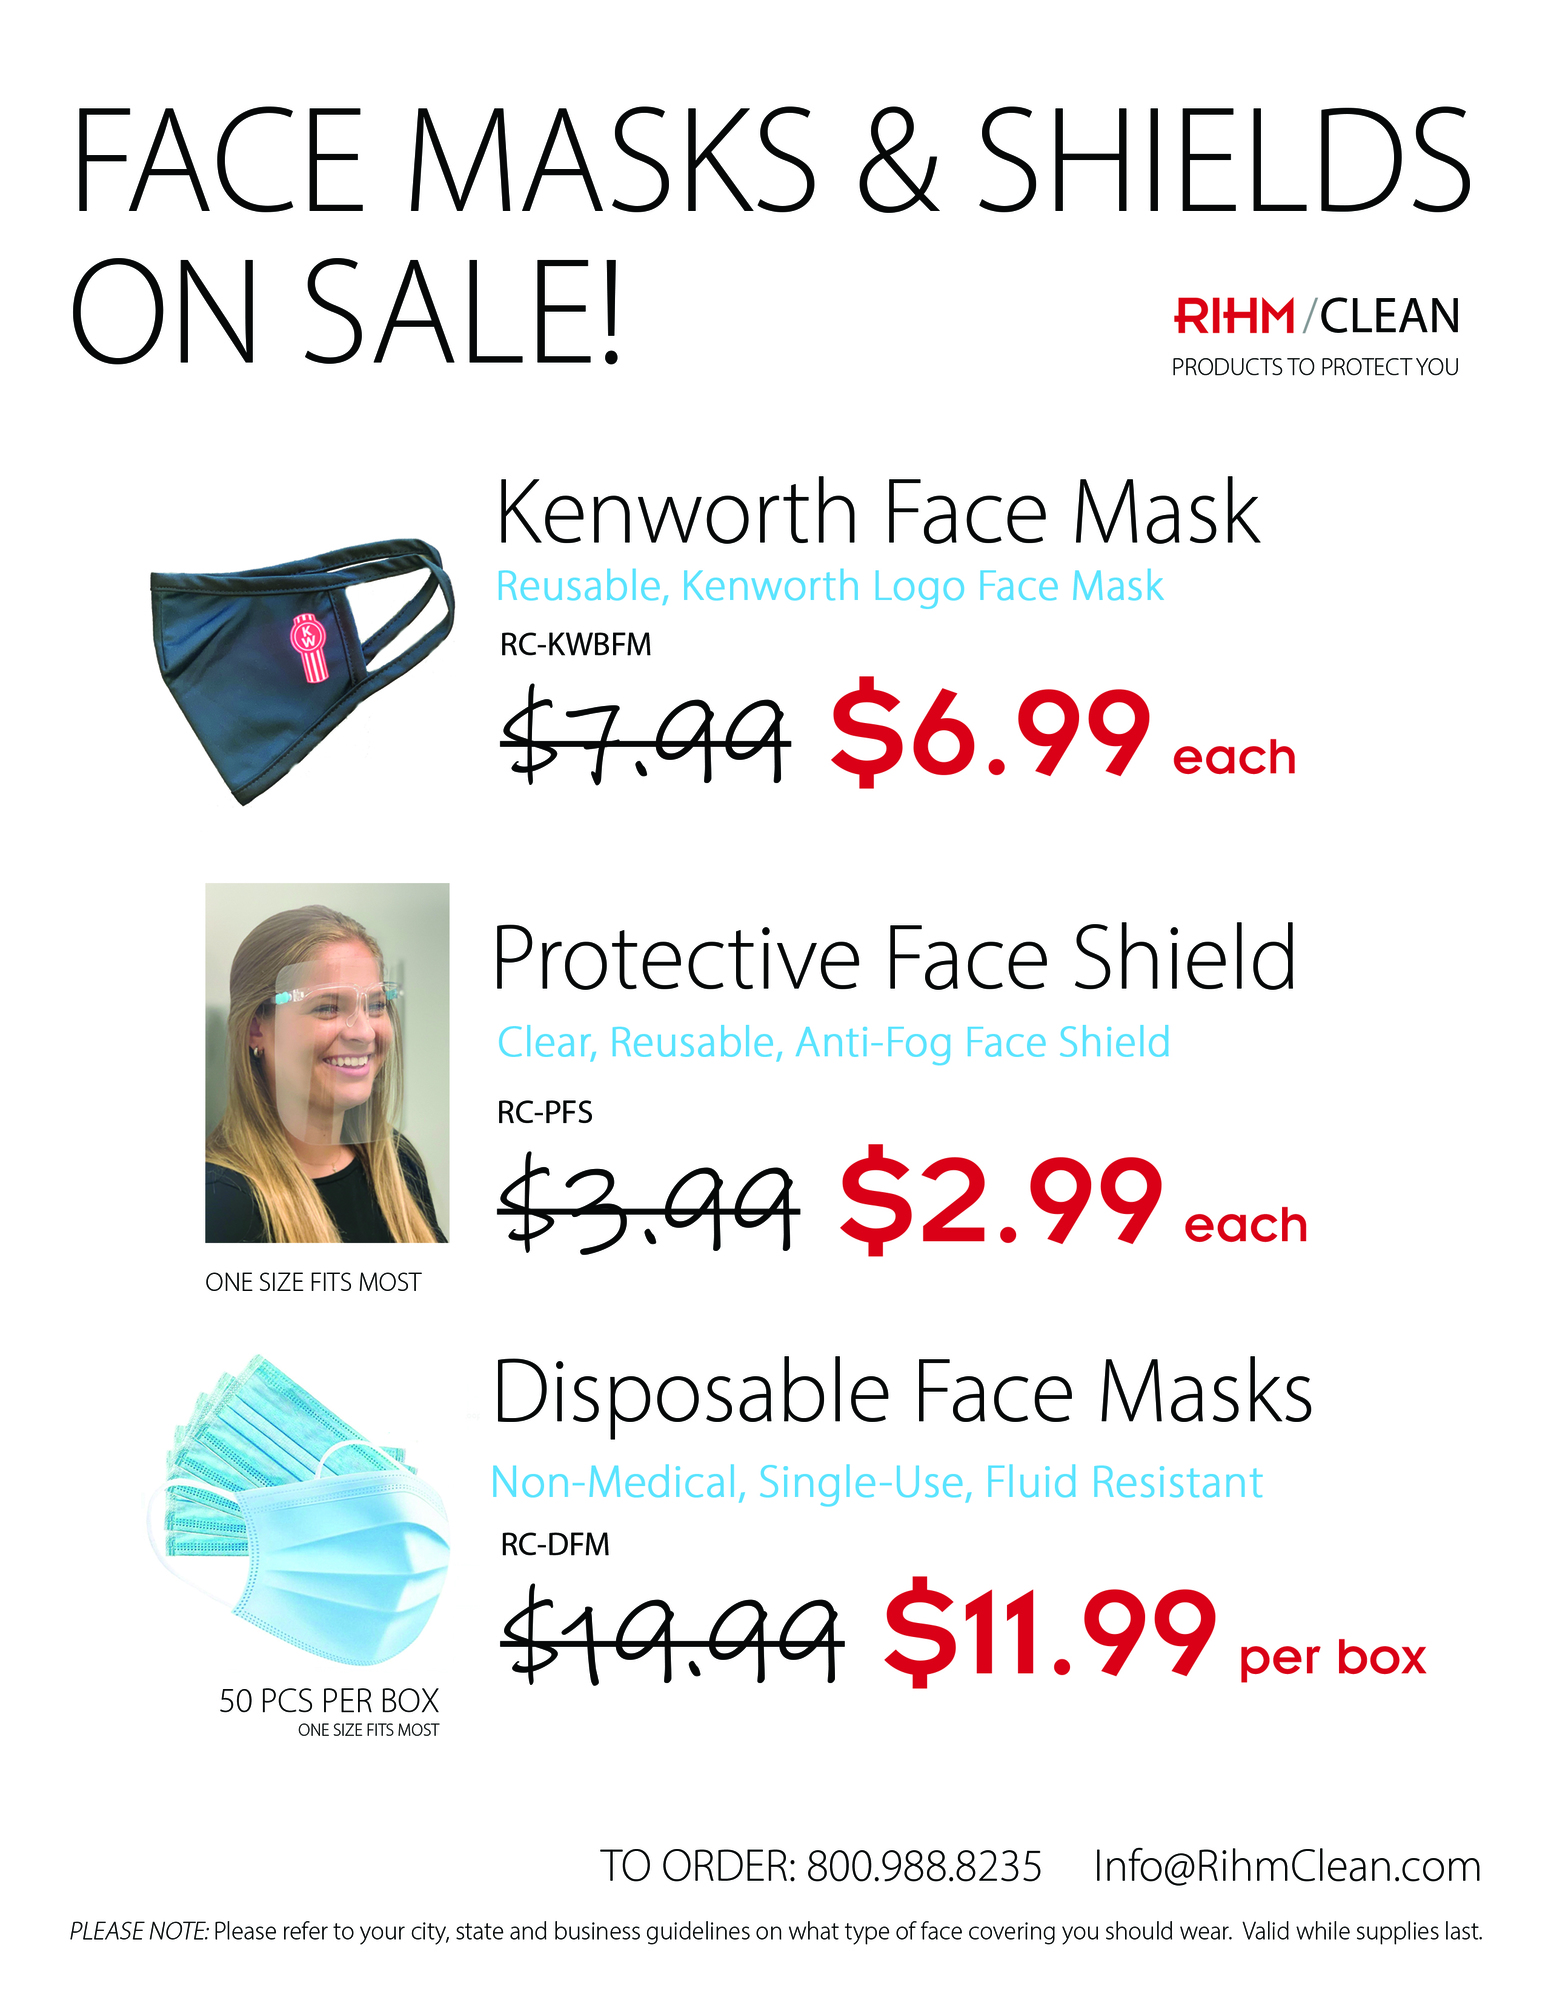 Protect Yourself with Face Masks and Shields from Rihm Kenworth Rihm Clean